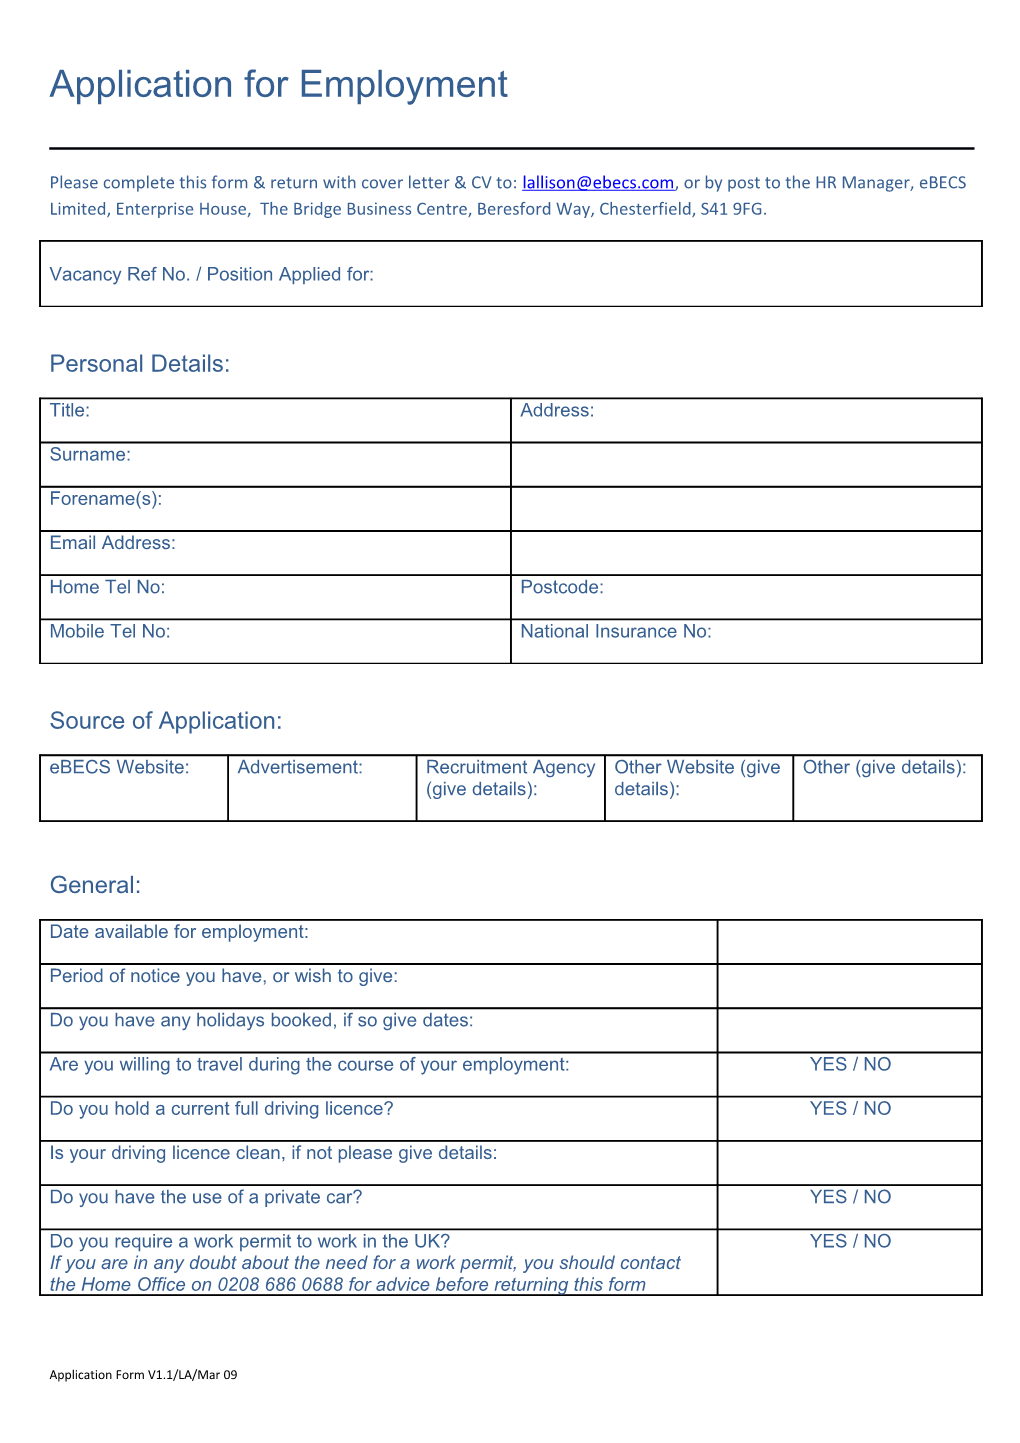 Application for Employment s78